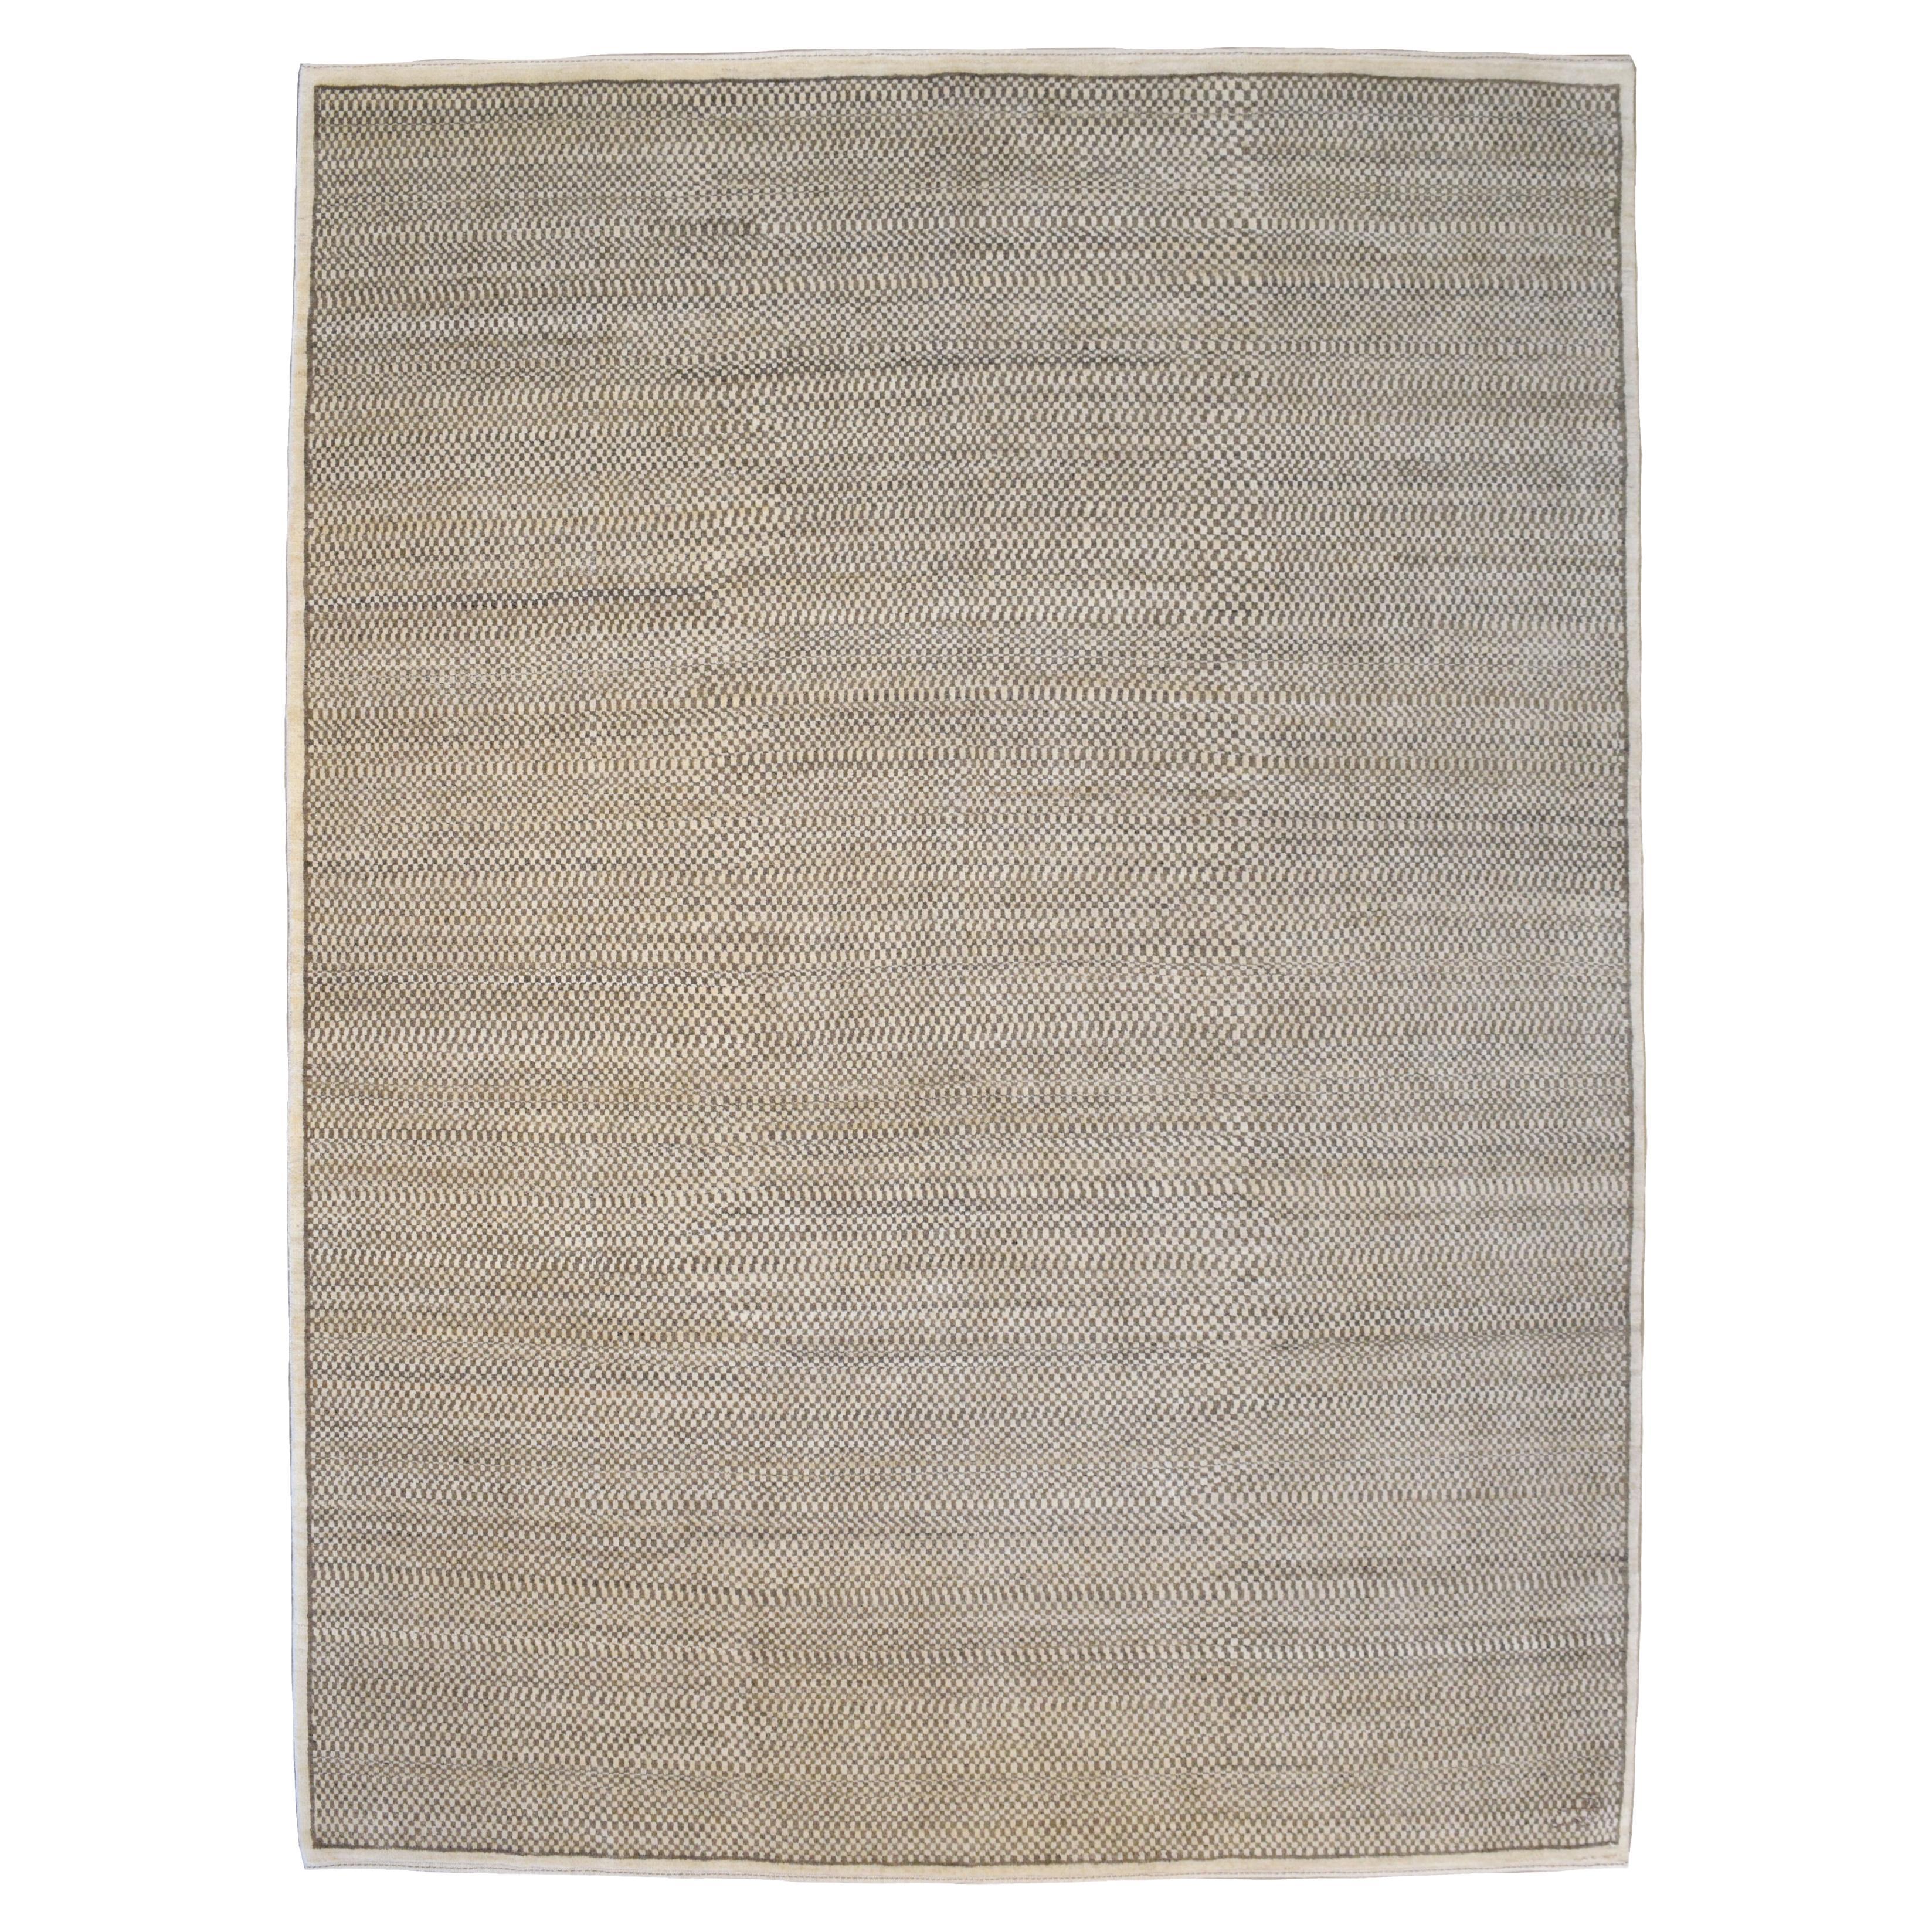 Brown and Cream Minimalist "Mottle" Modern Persian Wool Area Rug, 8x10 For Sale